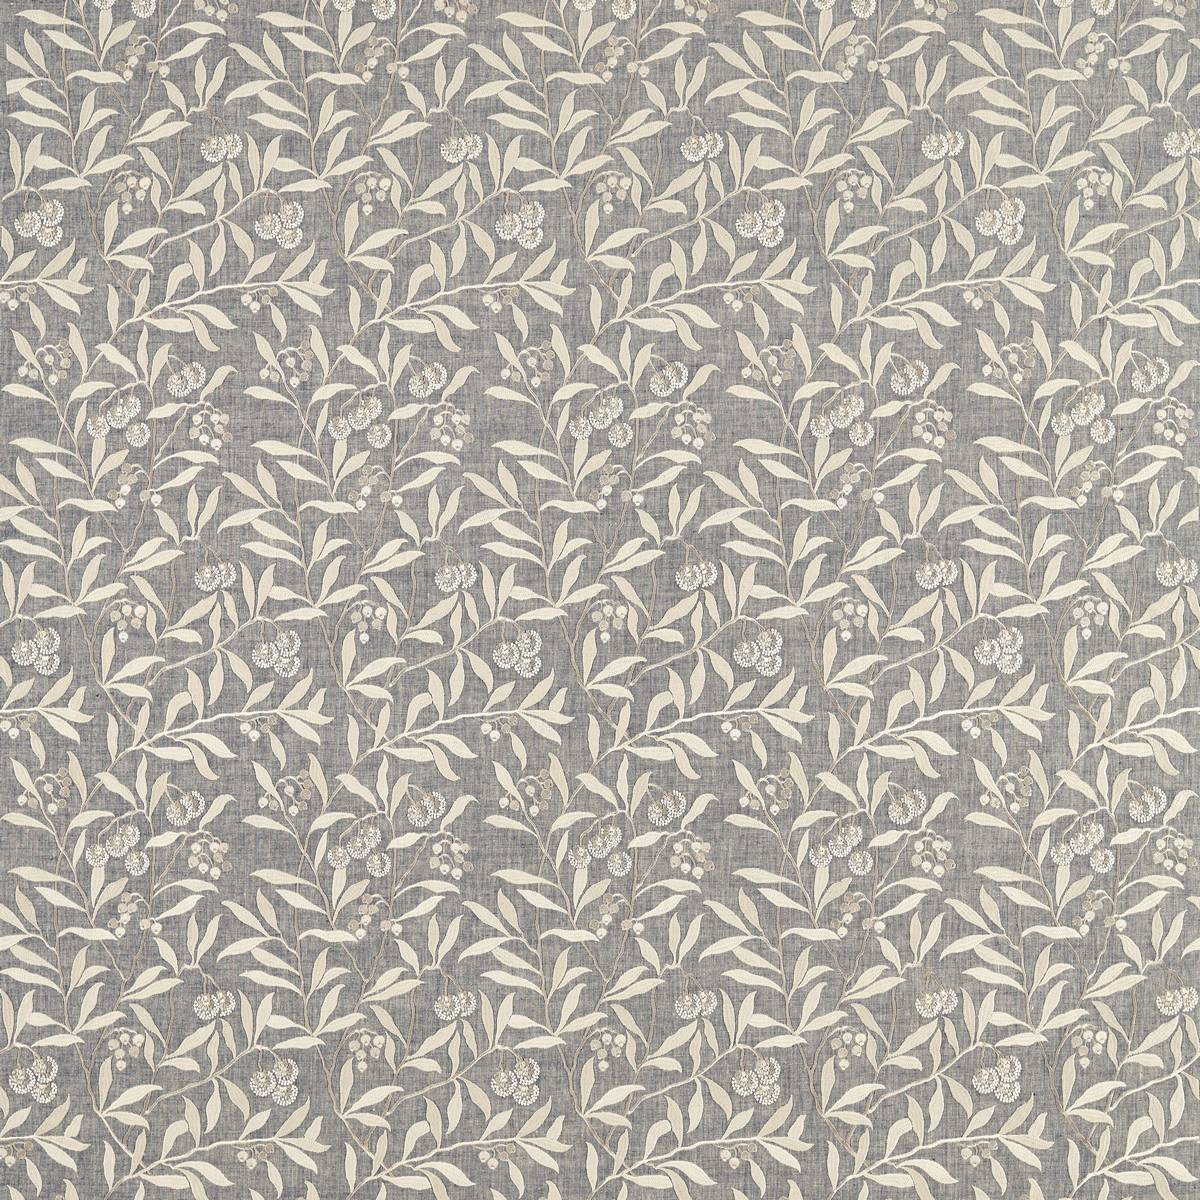 Pure Arbutus Embroidery Inky Grey Fabric by William Morris & Co.